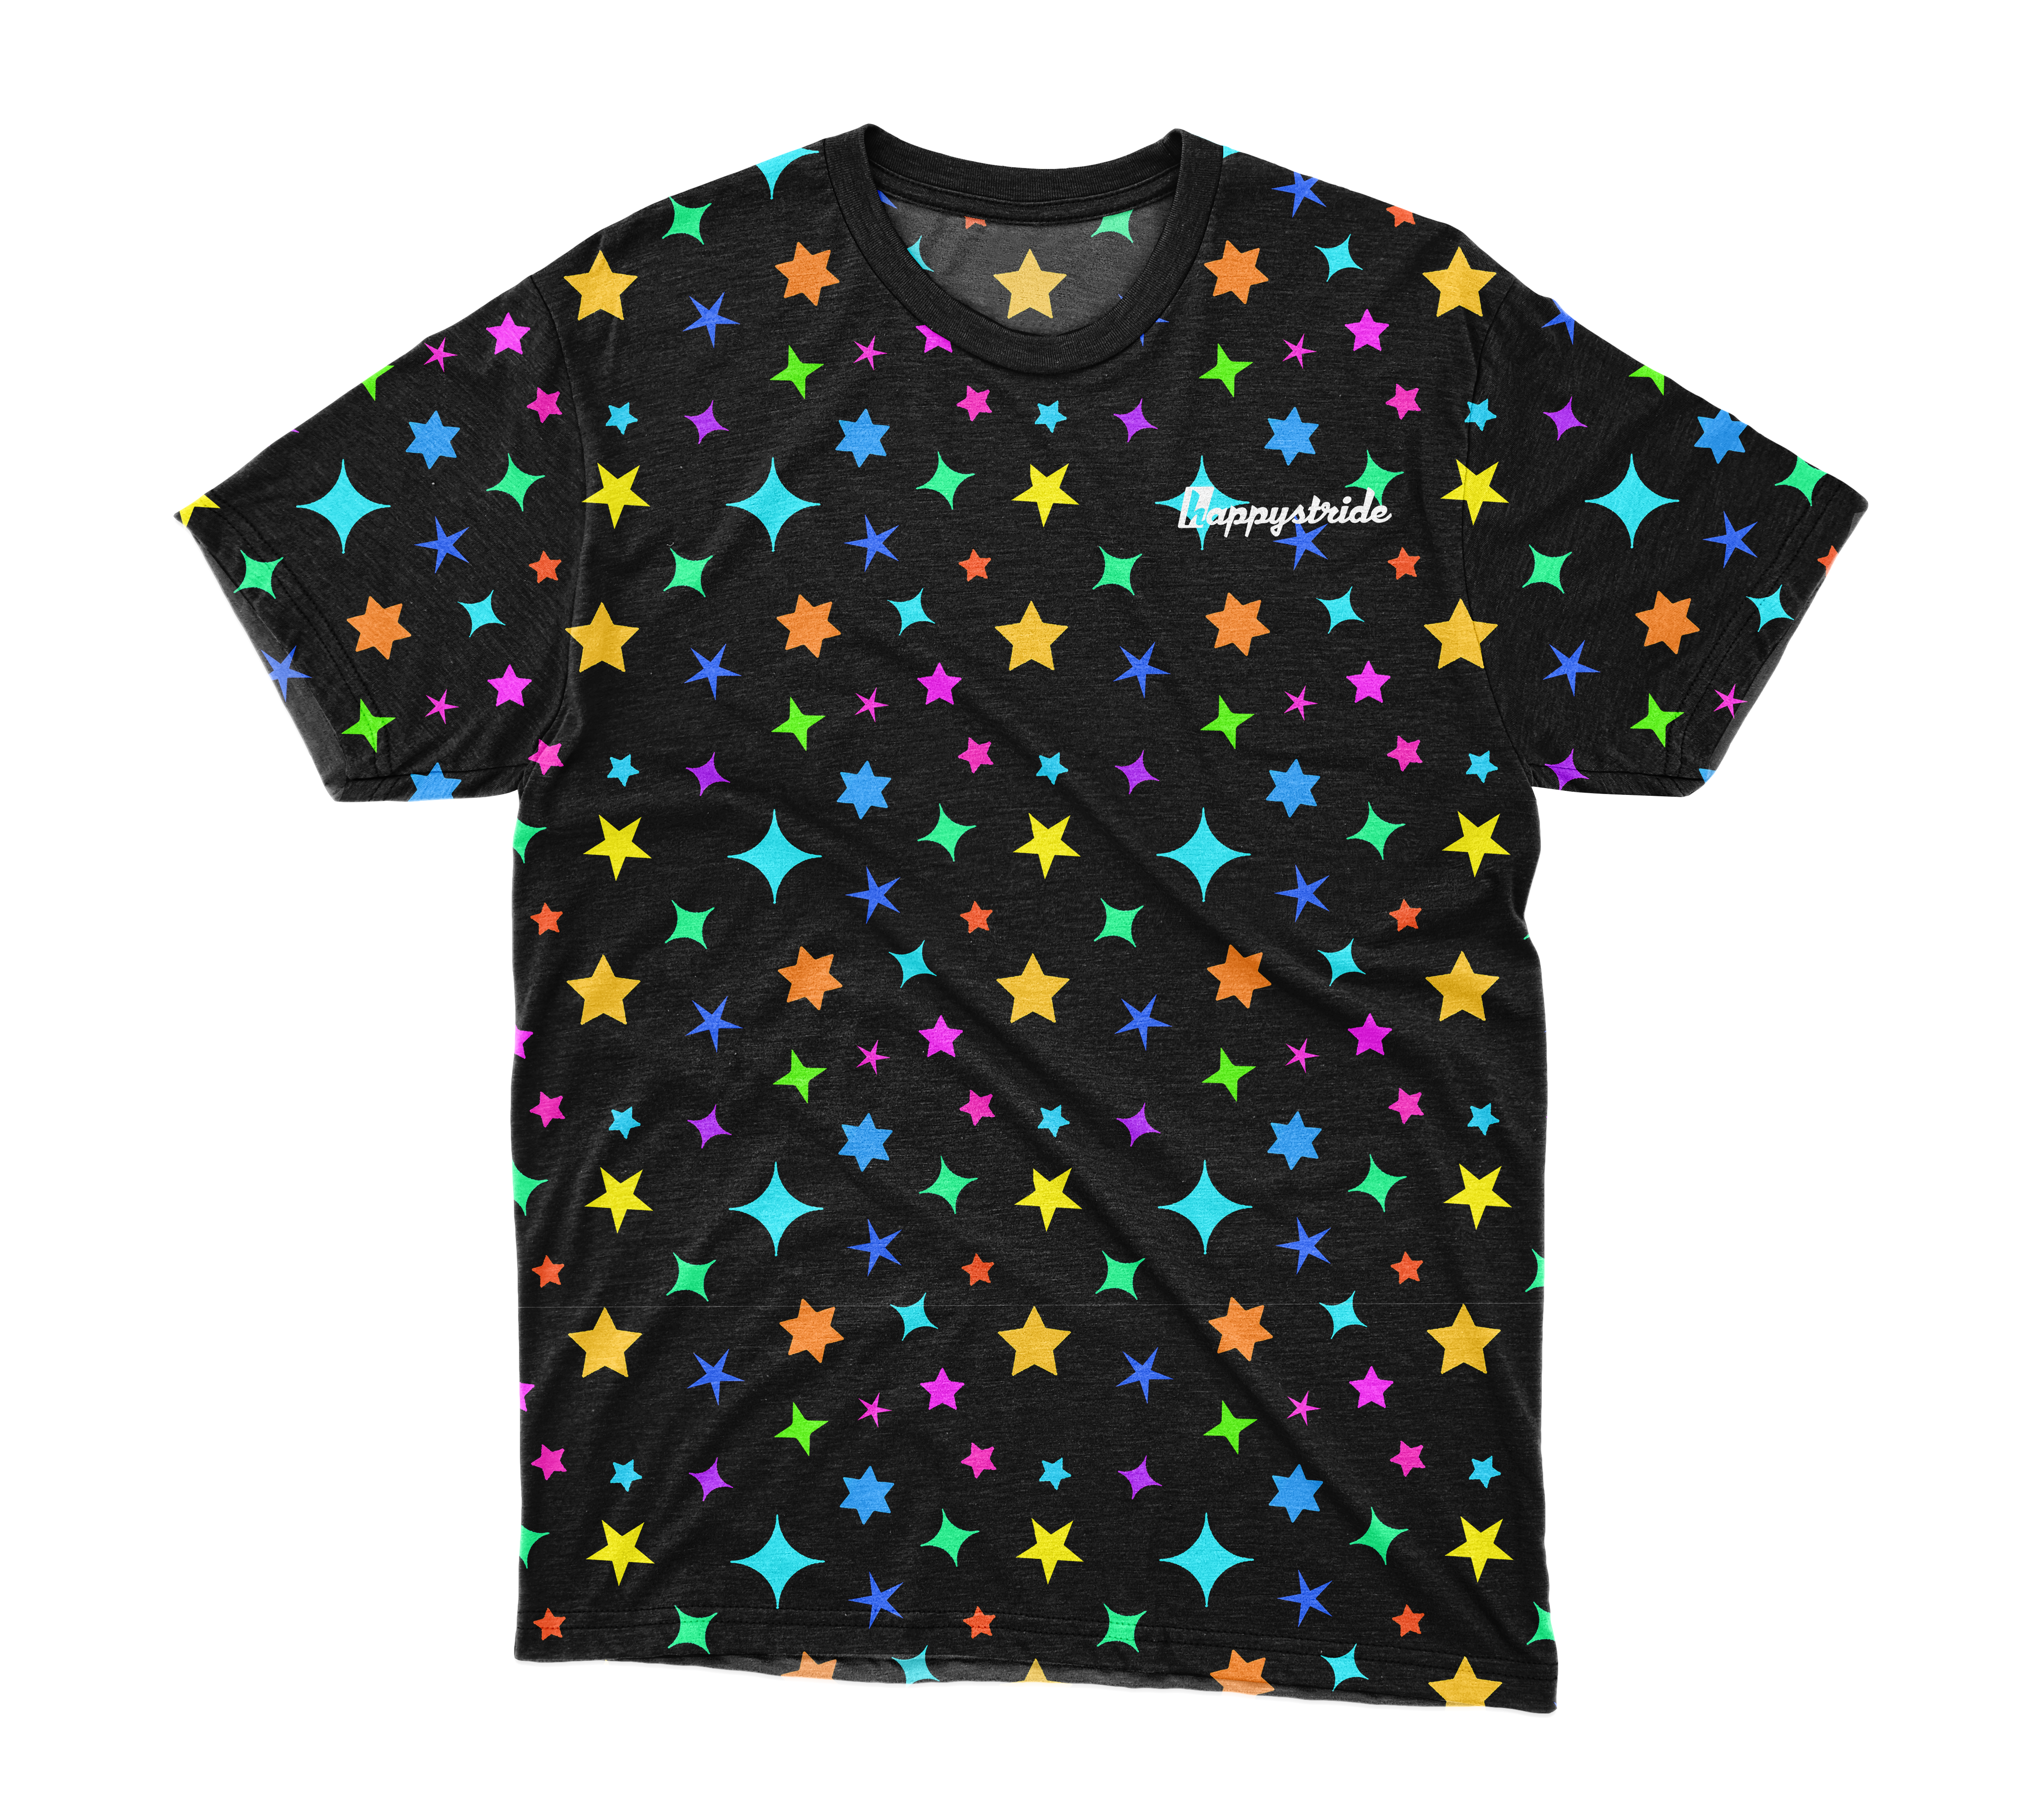 ''Stars in your eyes'' t-shirt